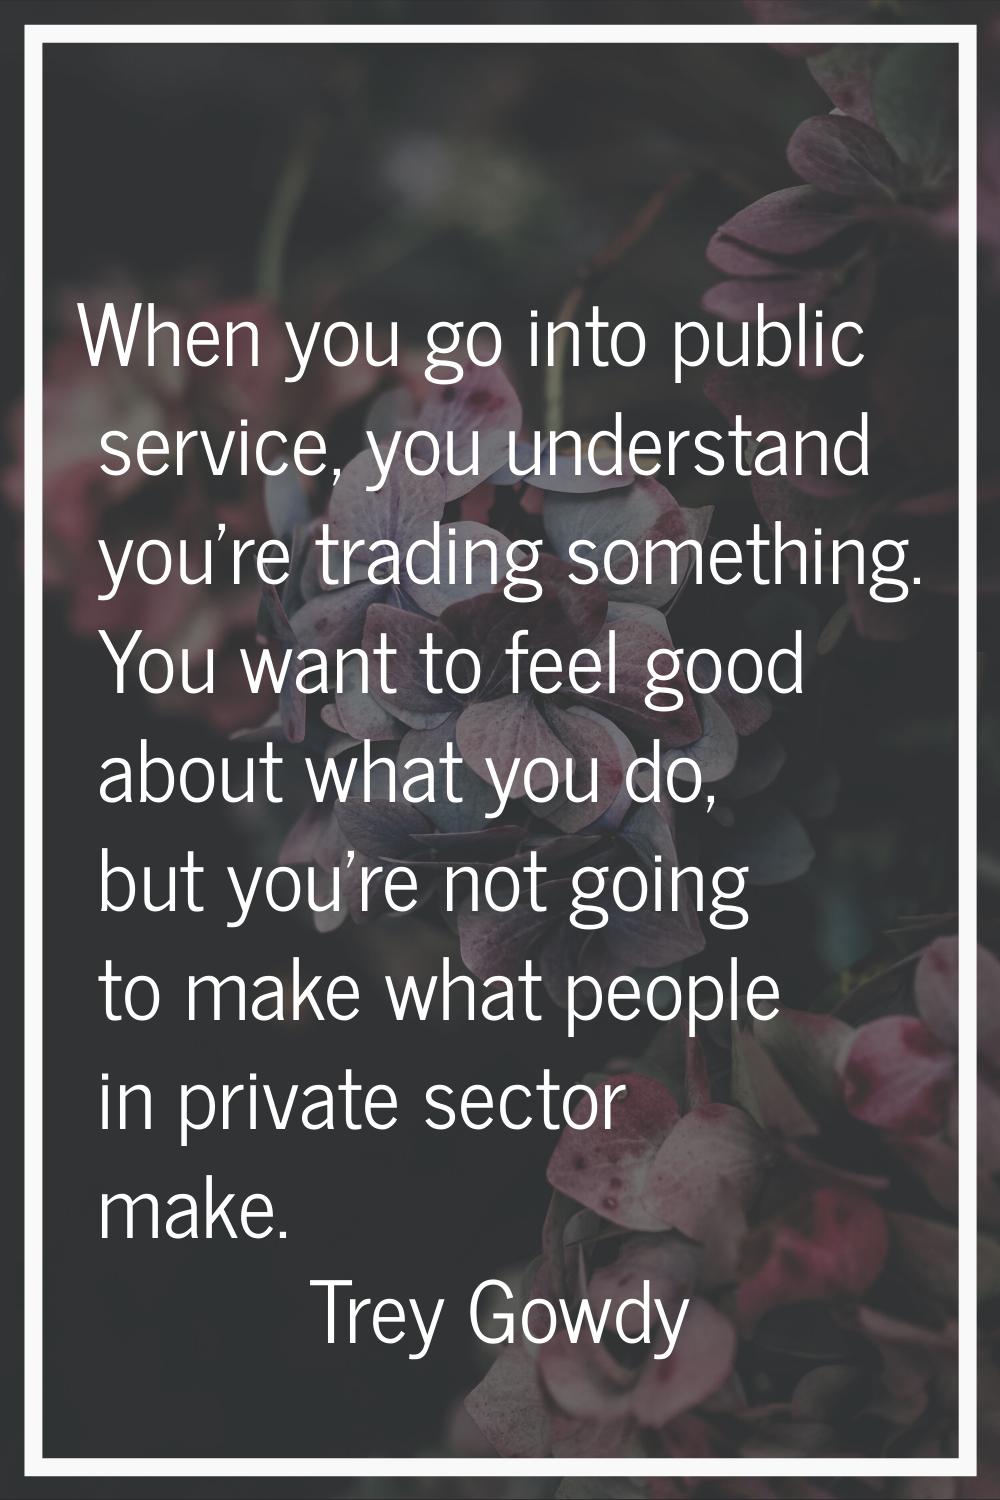 When you go into public service, you understand you're trading something. You want to feel good abo